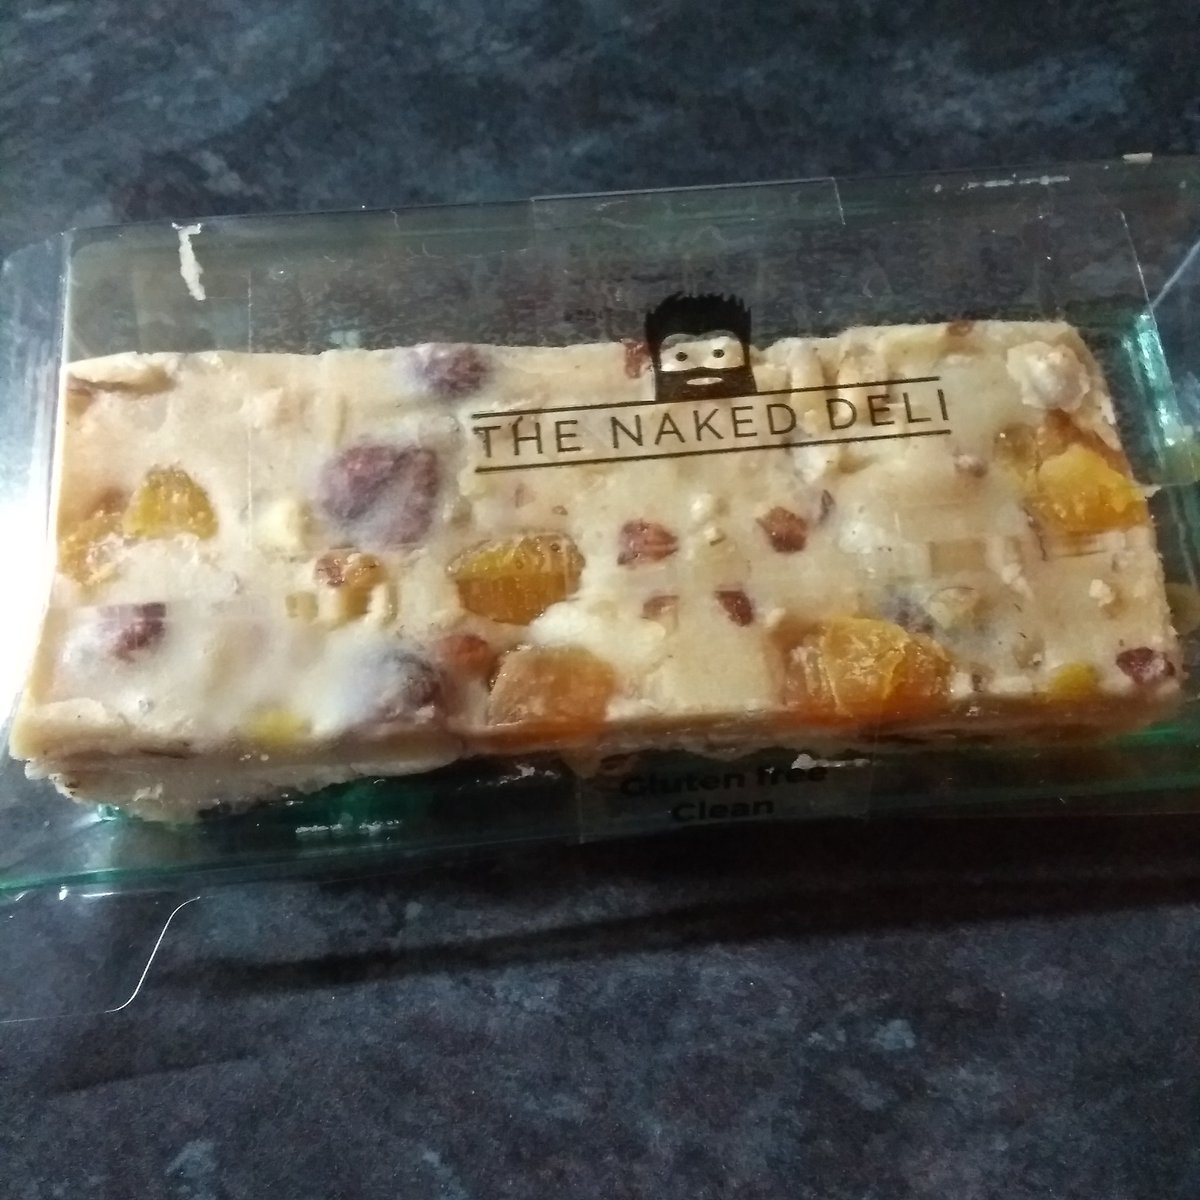 I should be on commission! My latest Naked Deli treat. This one is a white chocolate protein bar. #thenakeddeli #thenakeddeligosforth